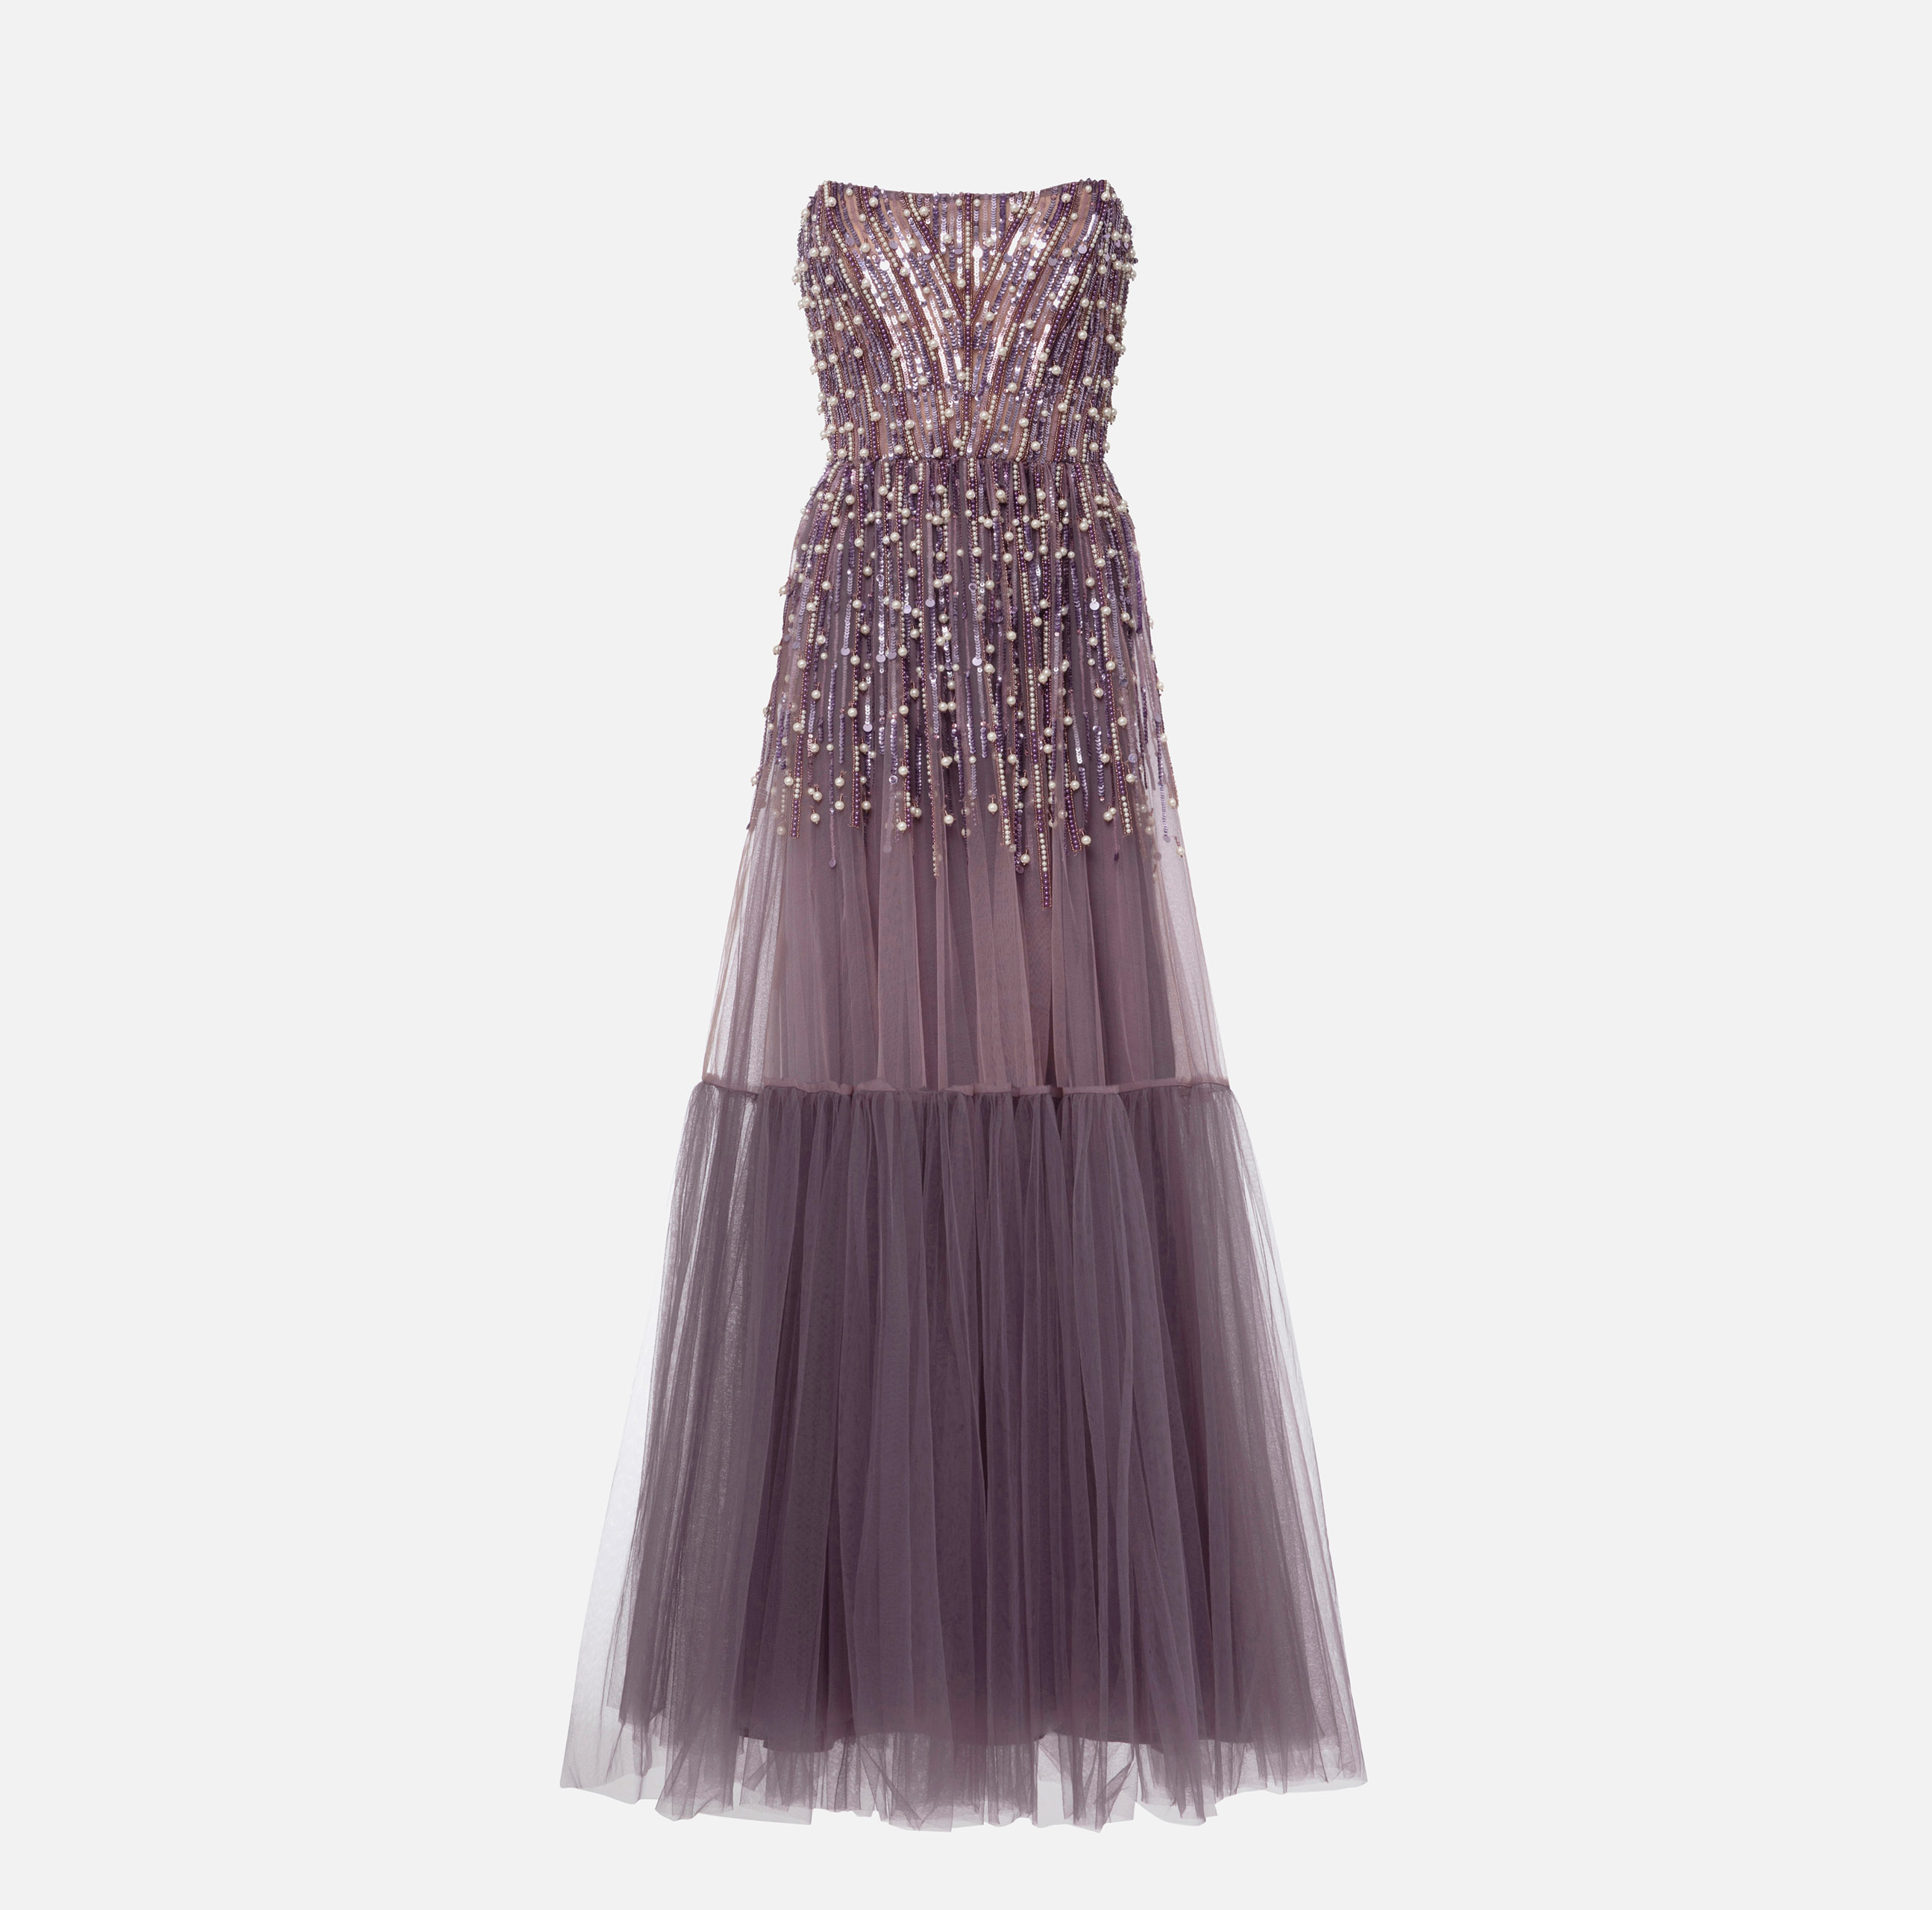 Needle and Thread Dresses and Accessories Featuring Tulle and Sequins